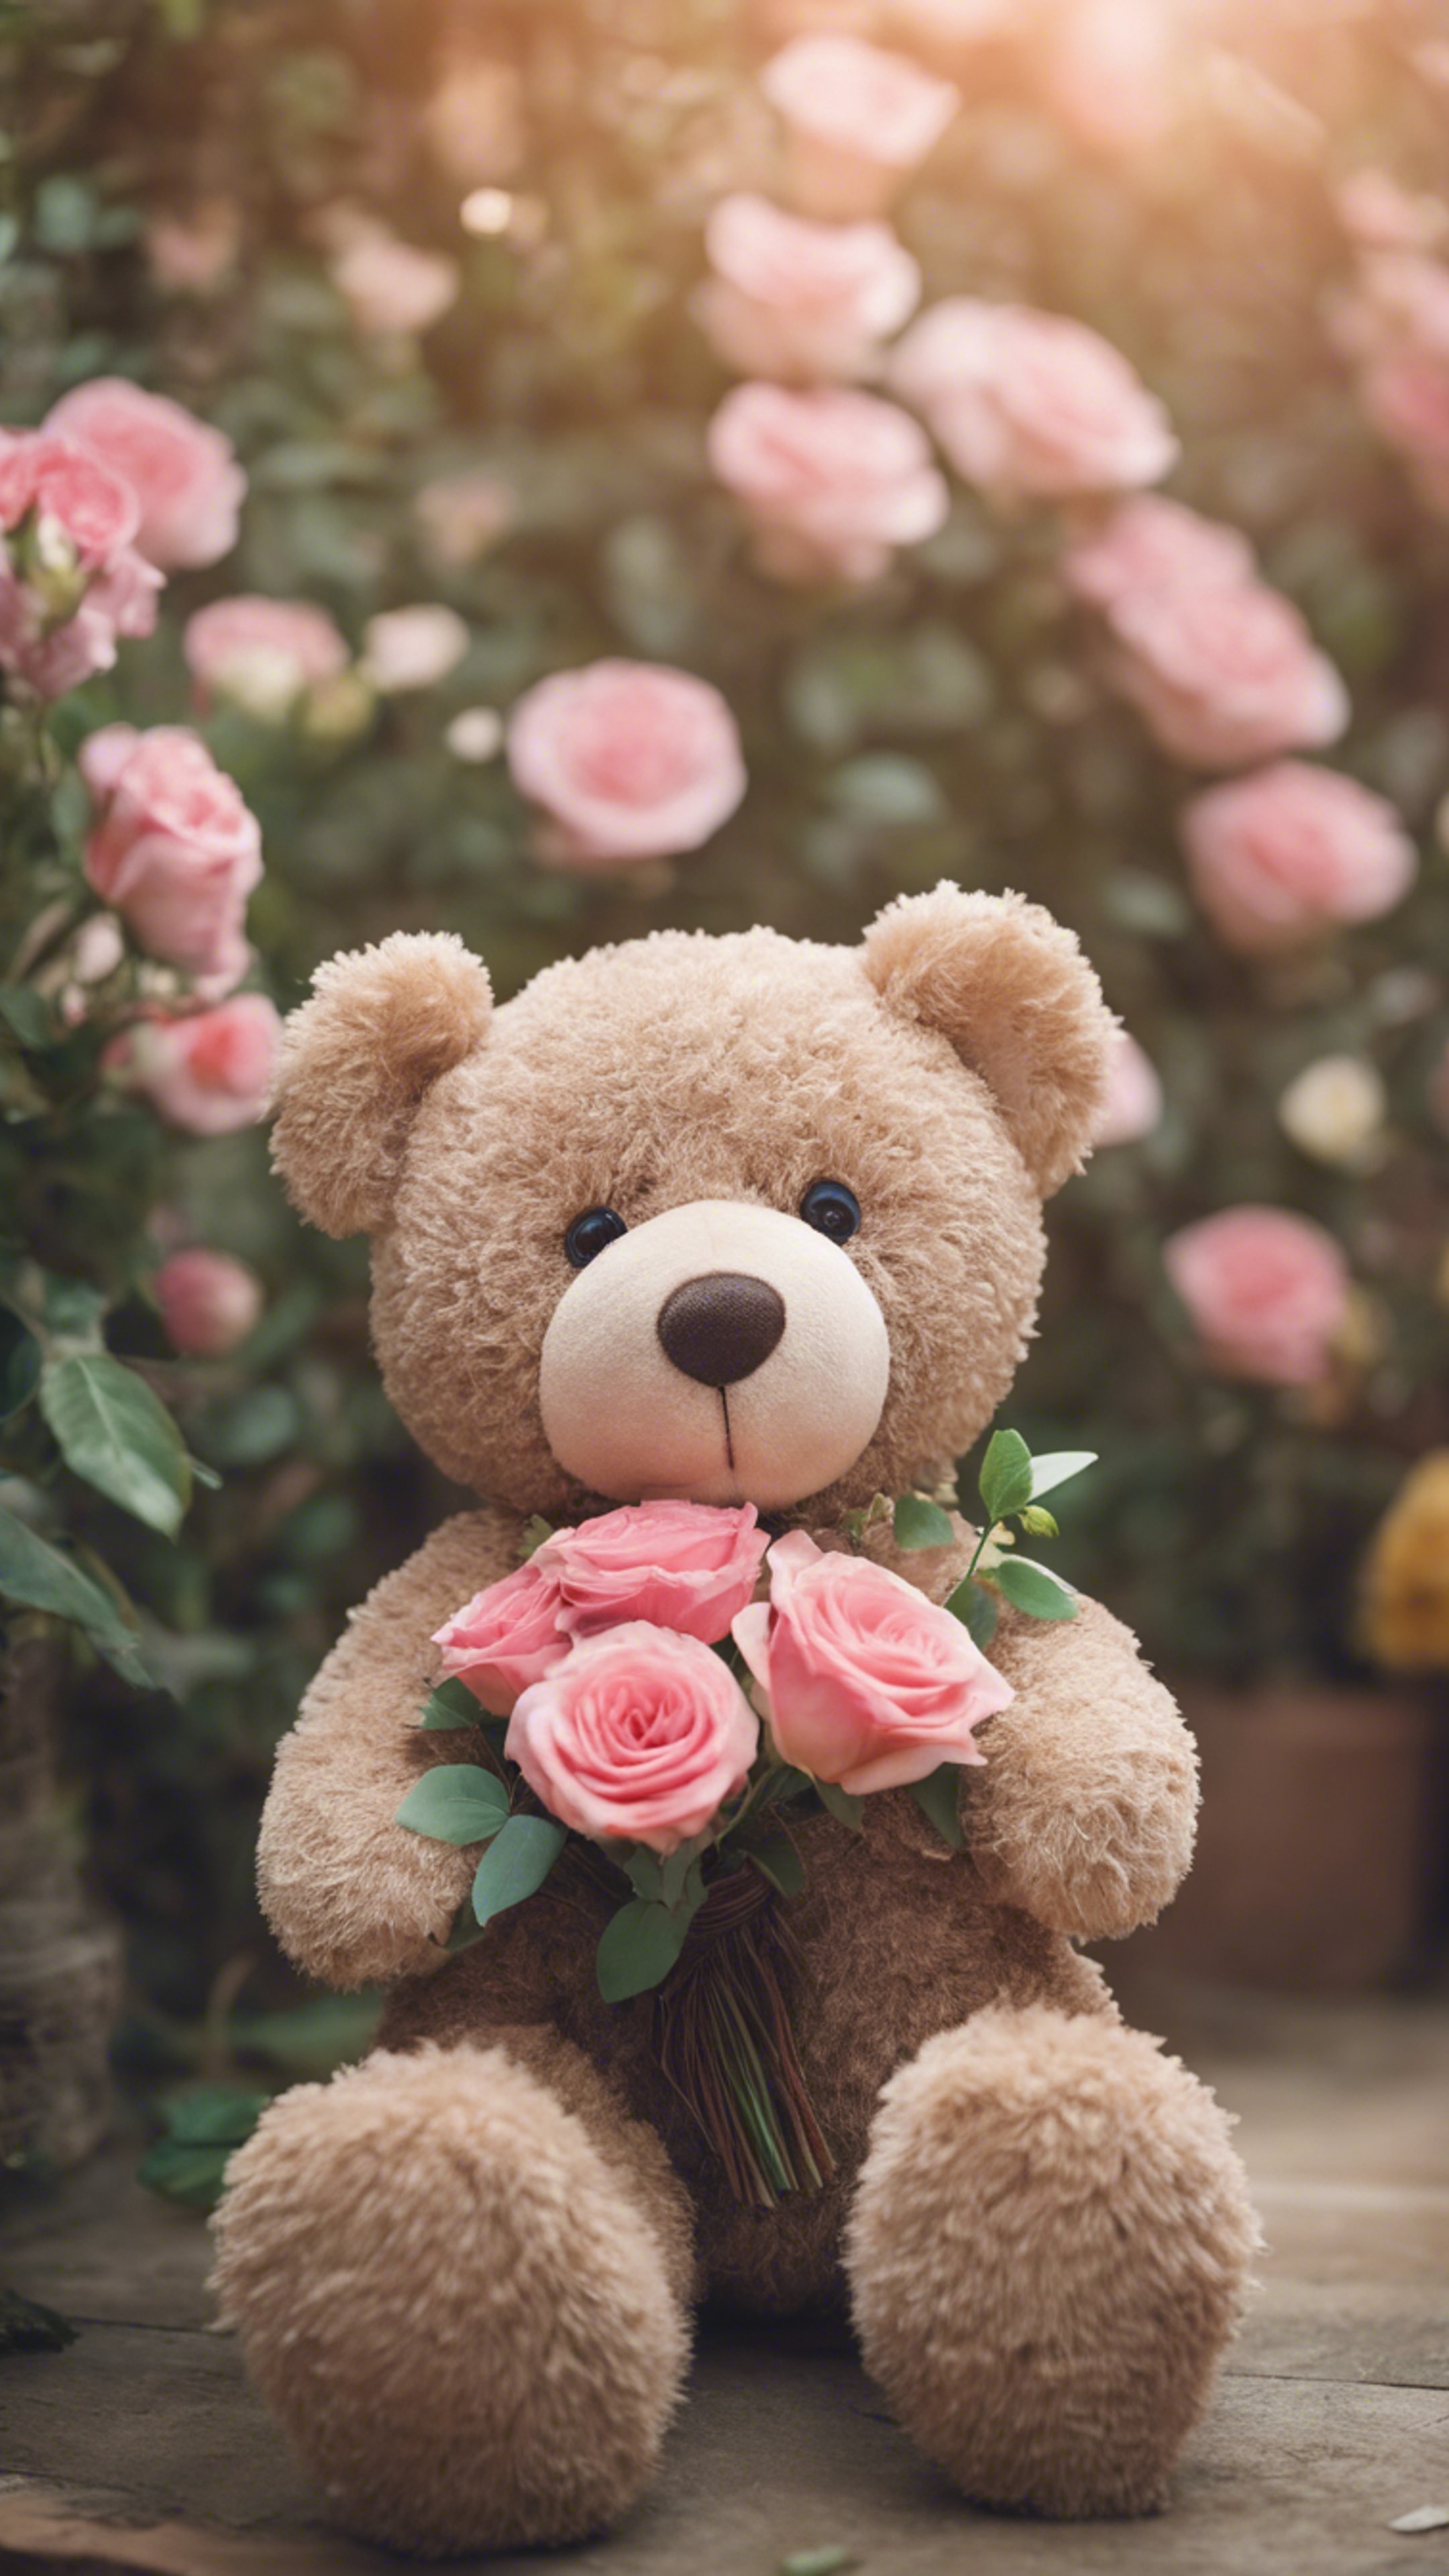 A teddy bear in a romantic setting, holding a bouquet of roses. Wallpaper[0c0a94ba405548b0bff3]